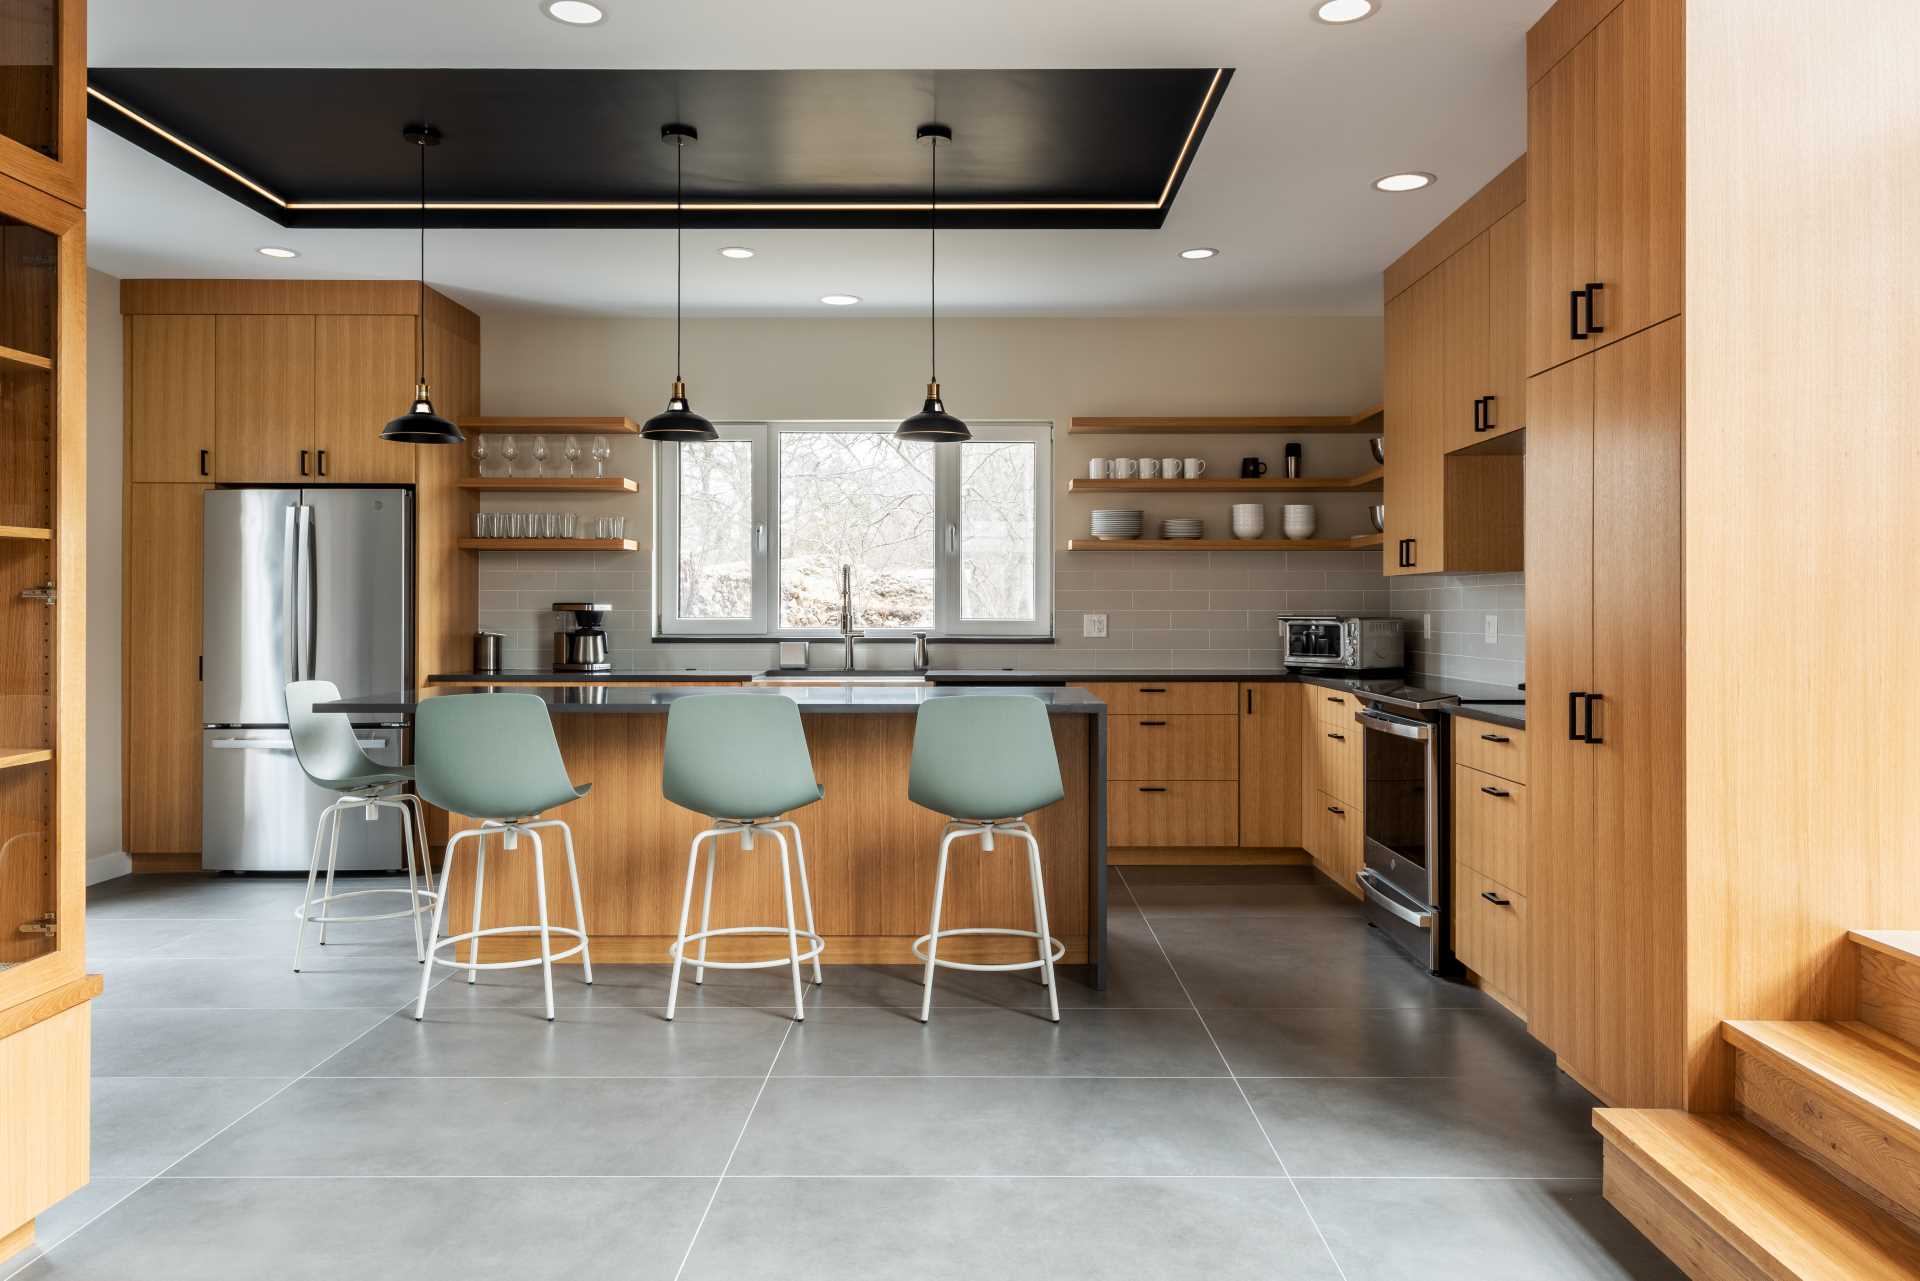 A modern wood kitchen with dark countertops, an island, and concrete flooring.